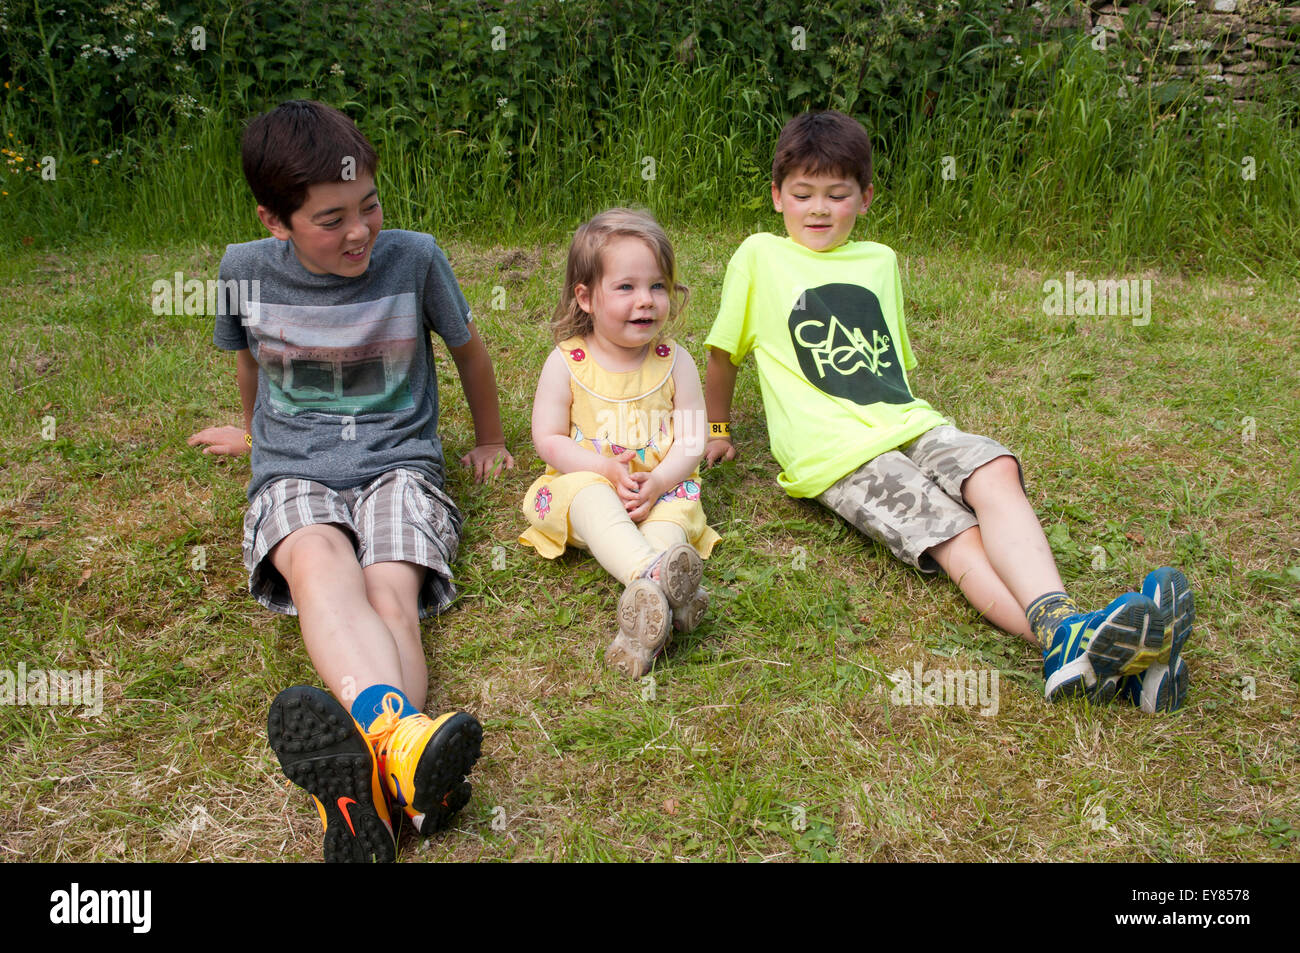 Little girl smiling, sitting on the grass with two boys Stock Photo